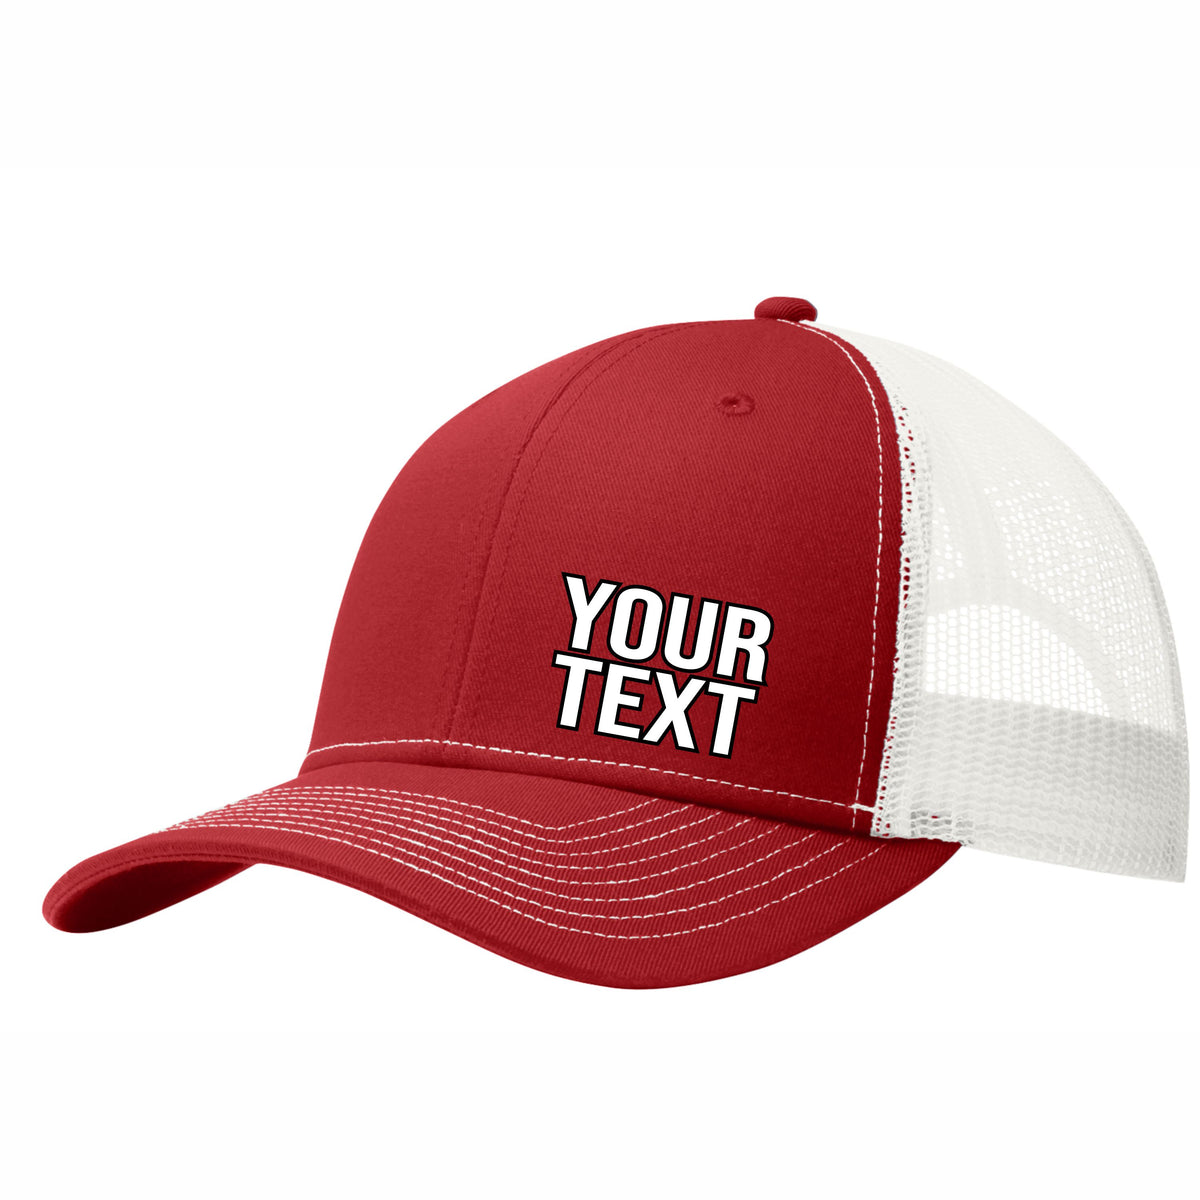 Your Text Here 6 Panel Mesh Snapback Hat Free Shipping